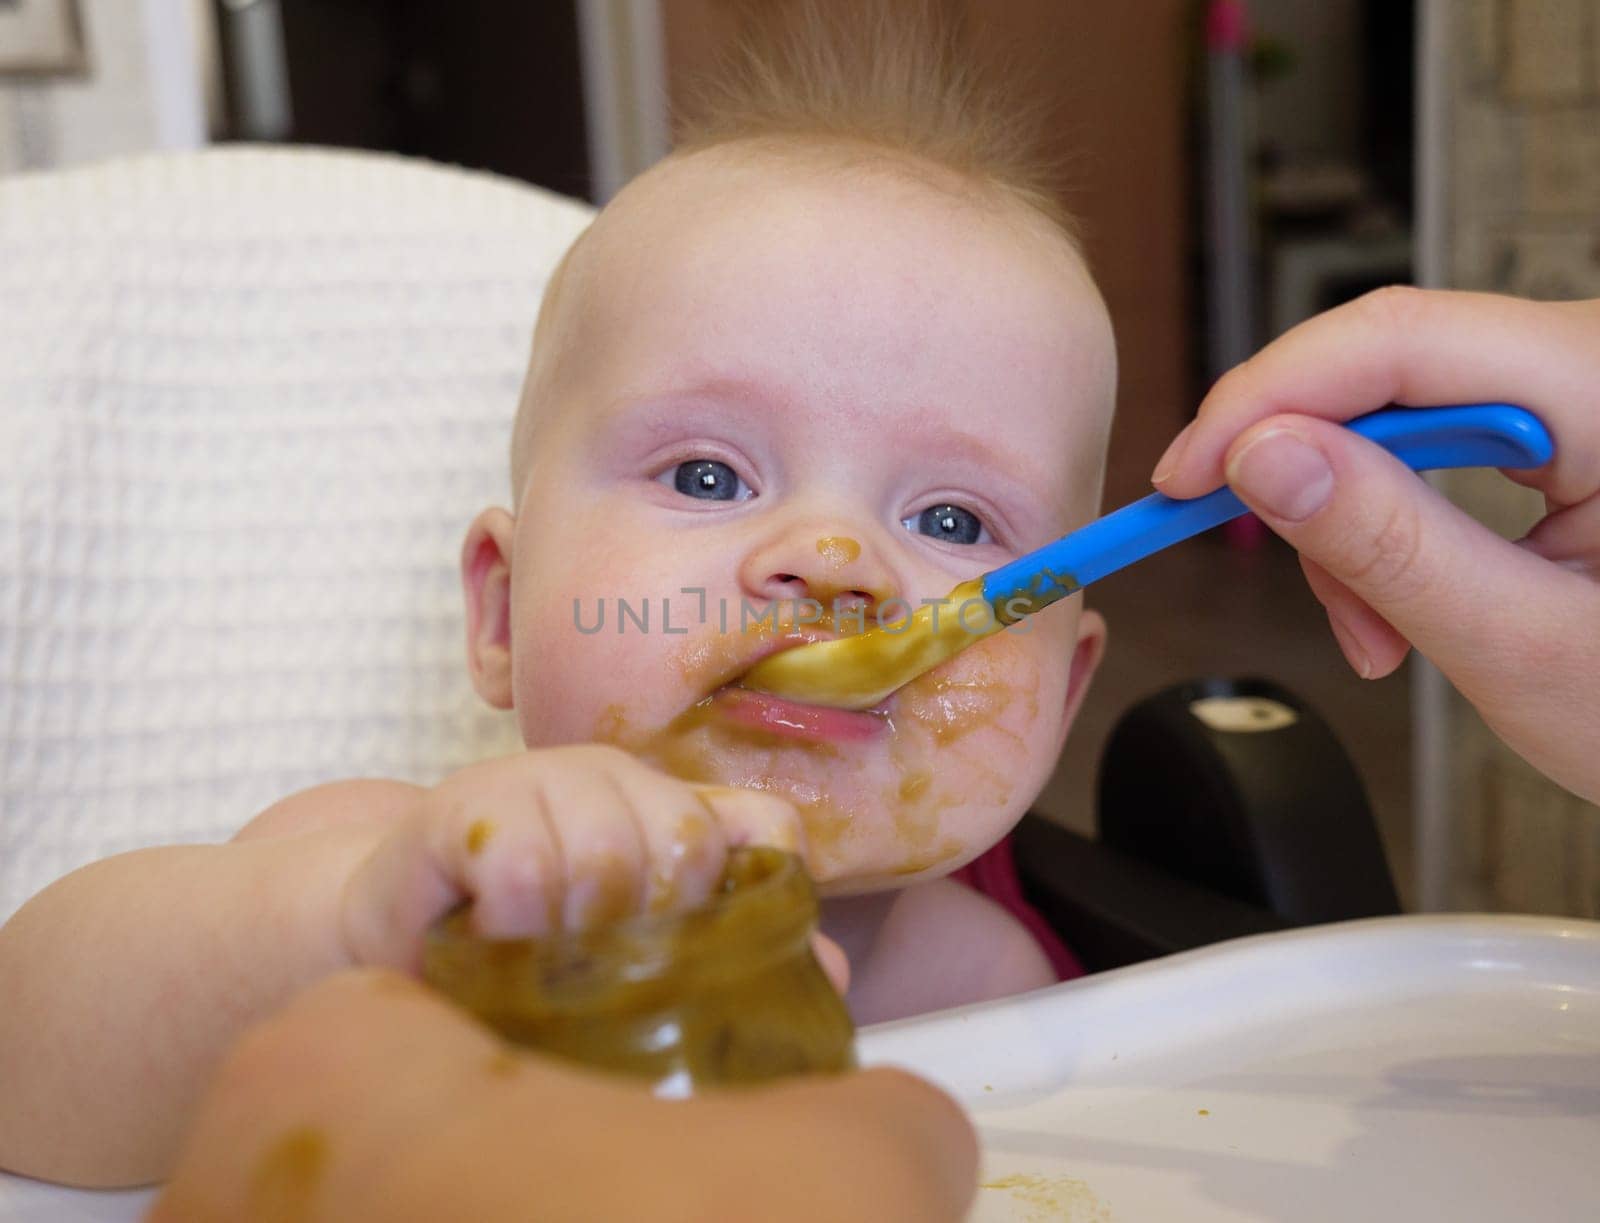 Mom feeding little boy with broccoli puree. Child at the age of six months eats broccoli while sitting on a baby chair.